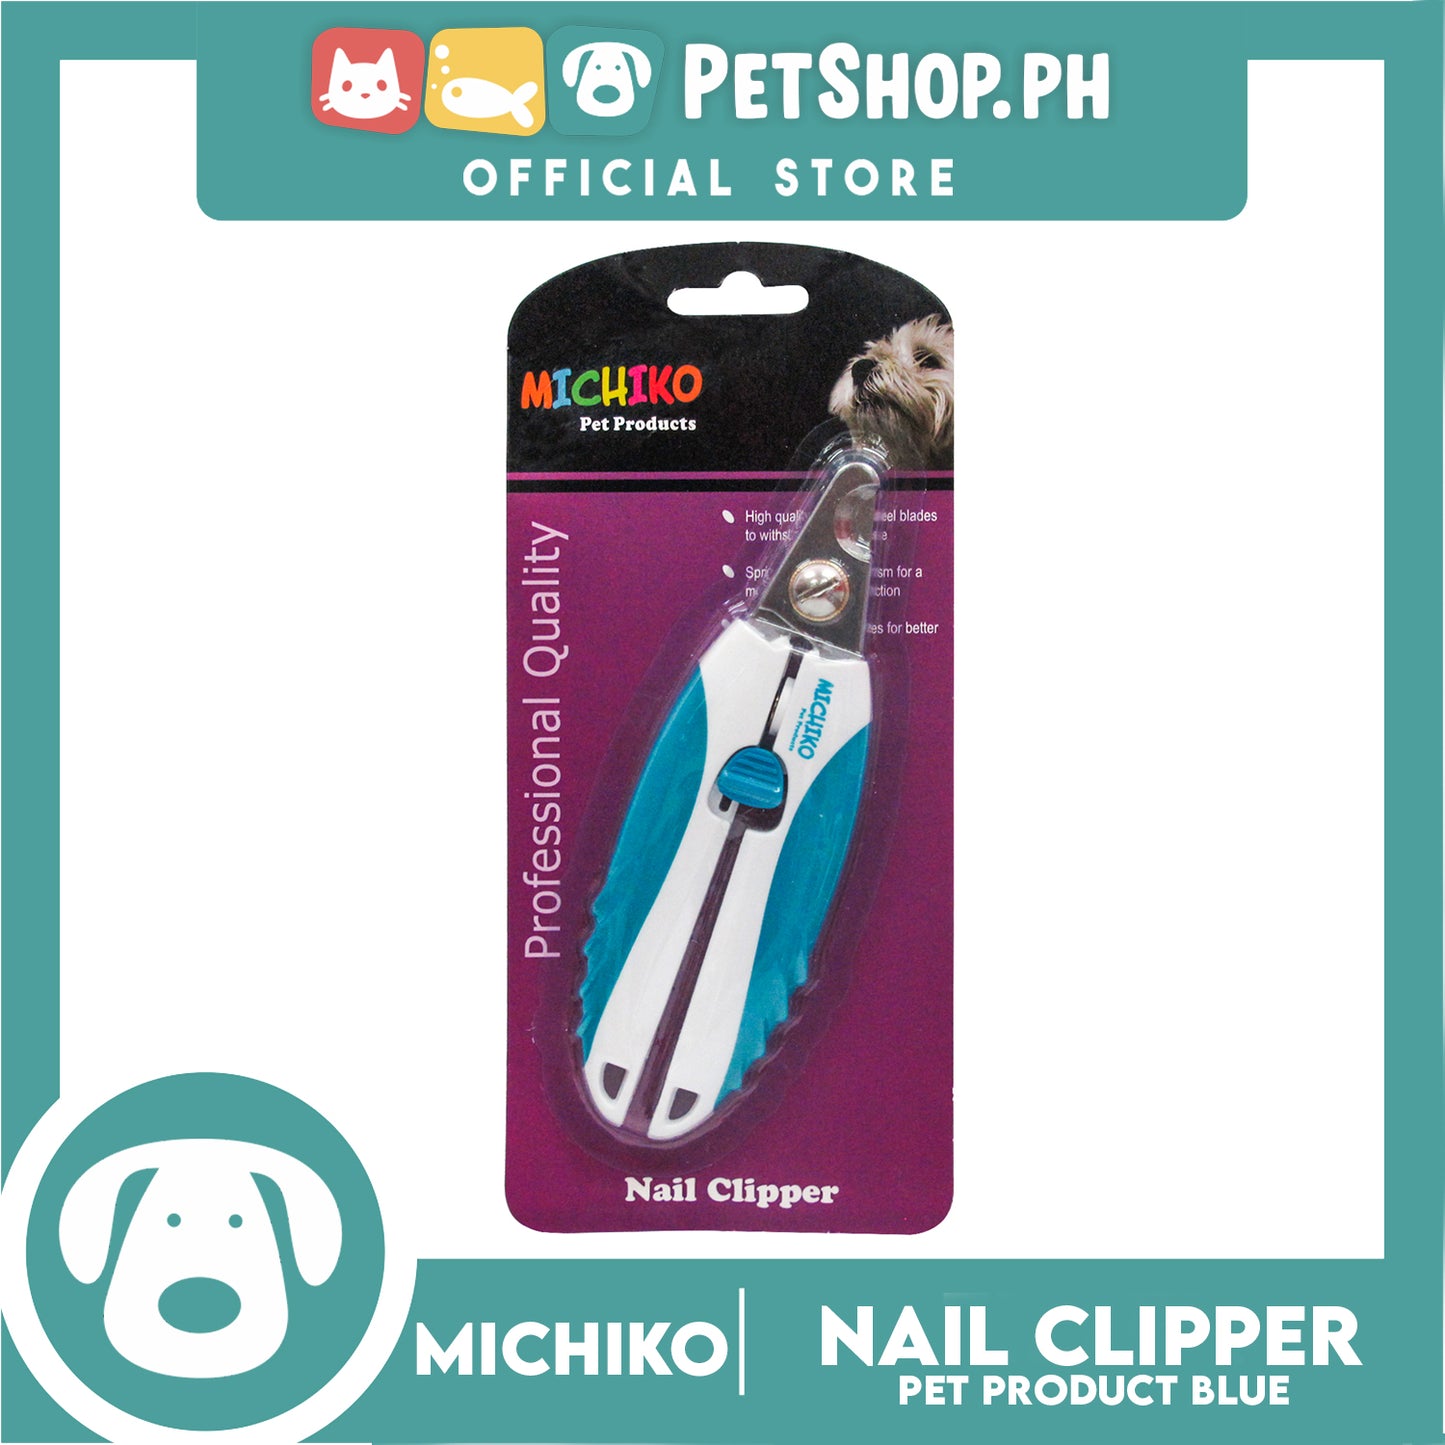 Michiko Premium Pet Nail Clipper Large (Blue) Trimming Nails Grooming For Small Breed Dogs And Cats